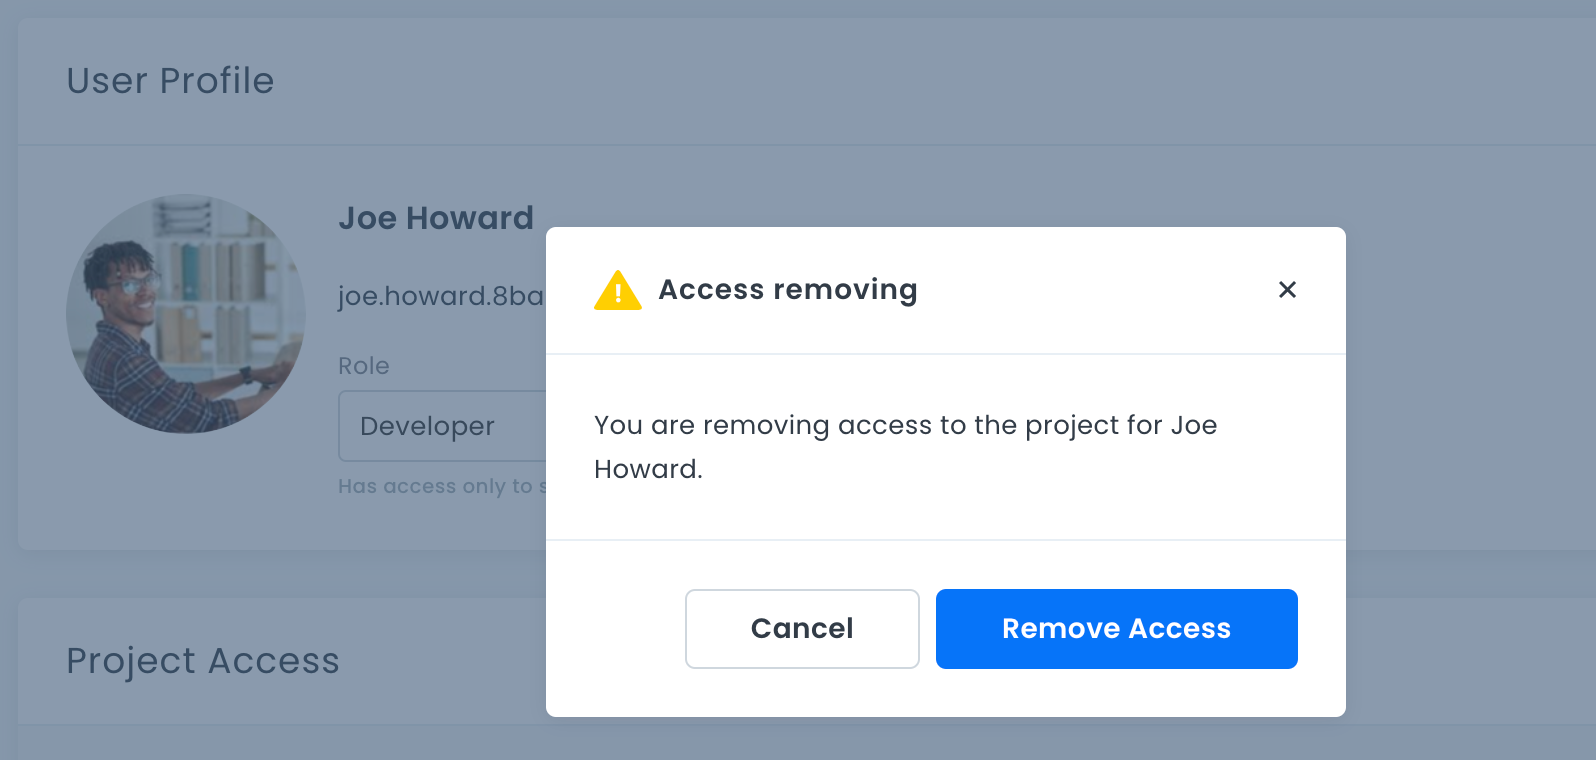 Removing access